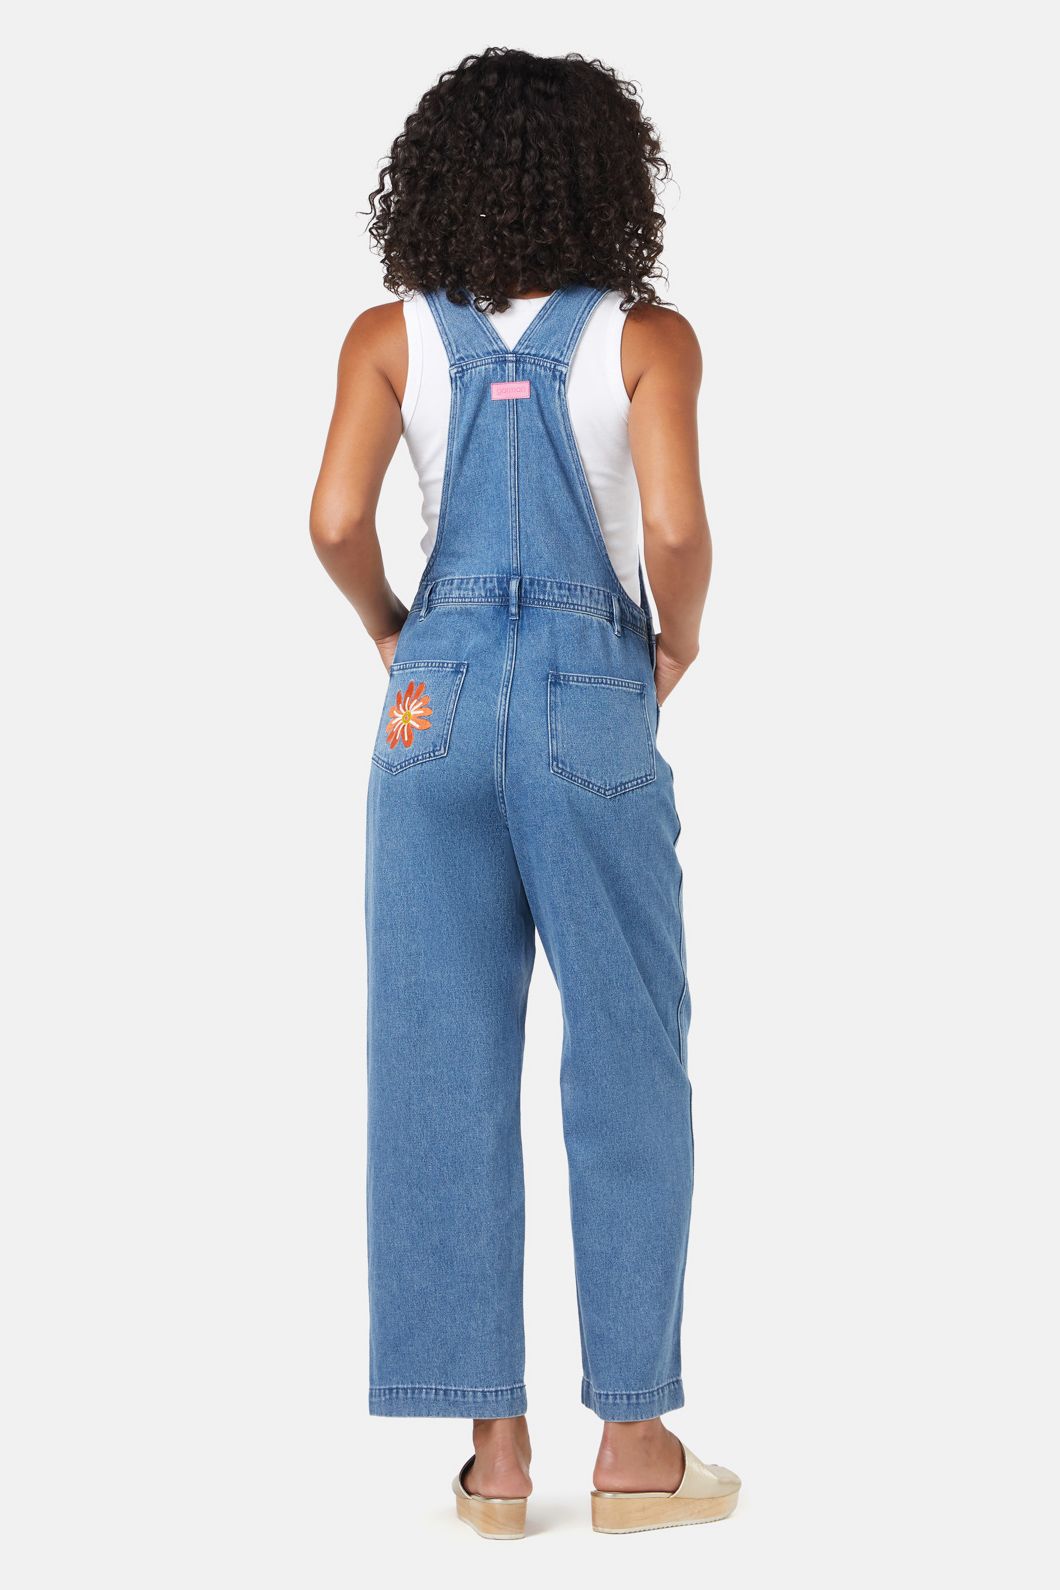 Womens Jumpsuit Denim Overalls Spring Autumn Casual Ripped Hole Loose